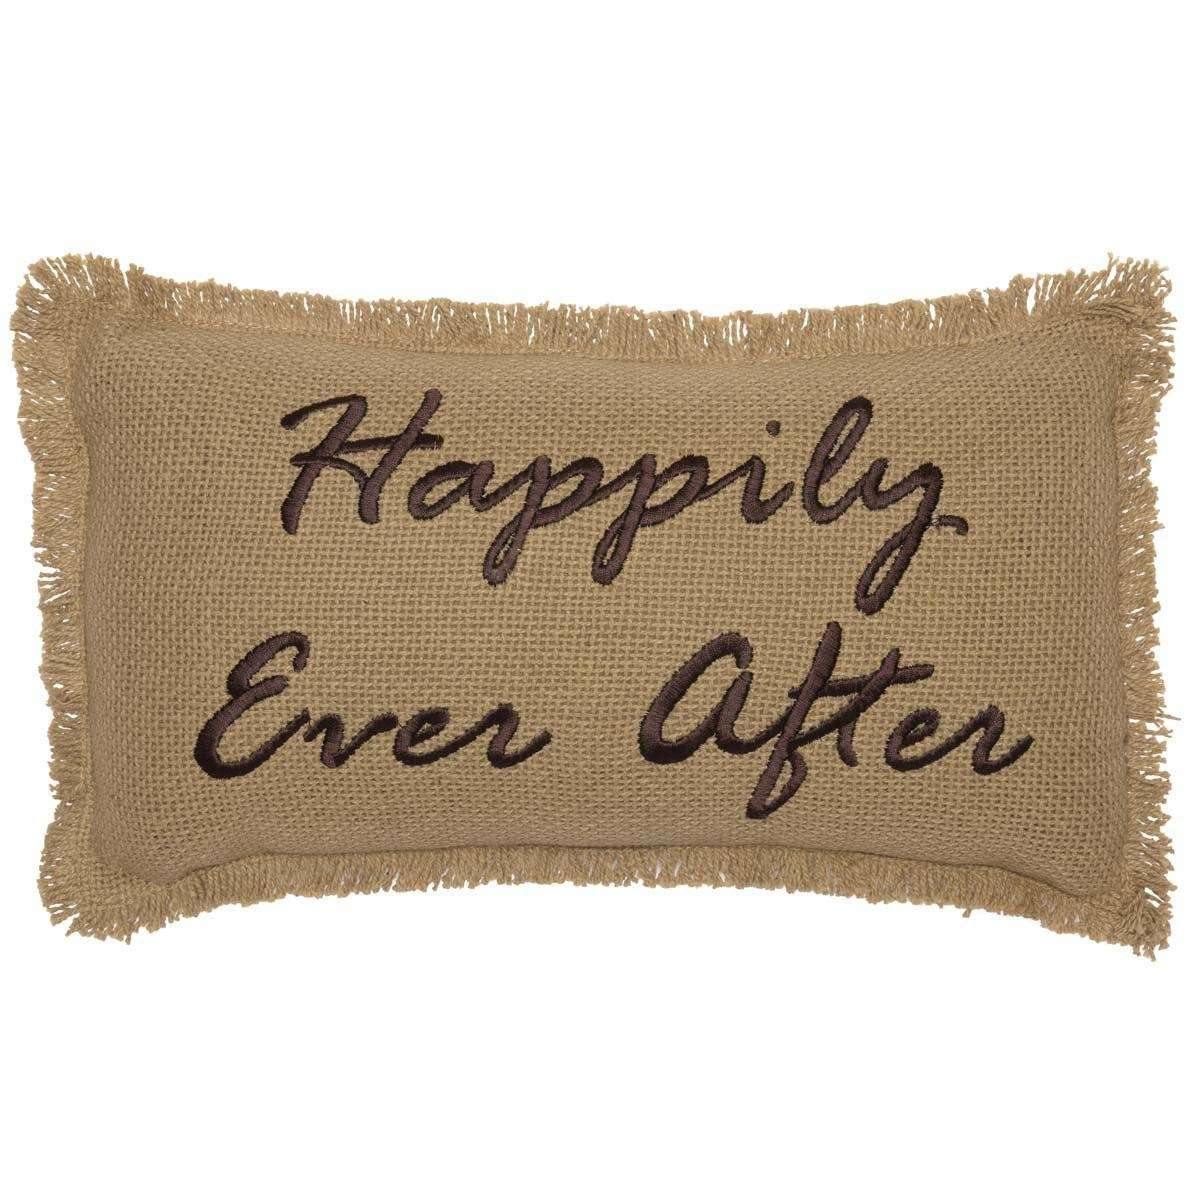 Burlap Natural Pillow Happily Ever After 7x13 VHC Brands front